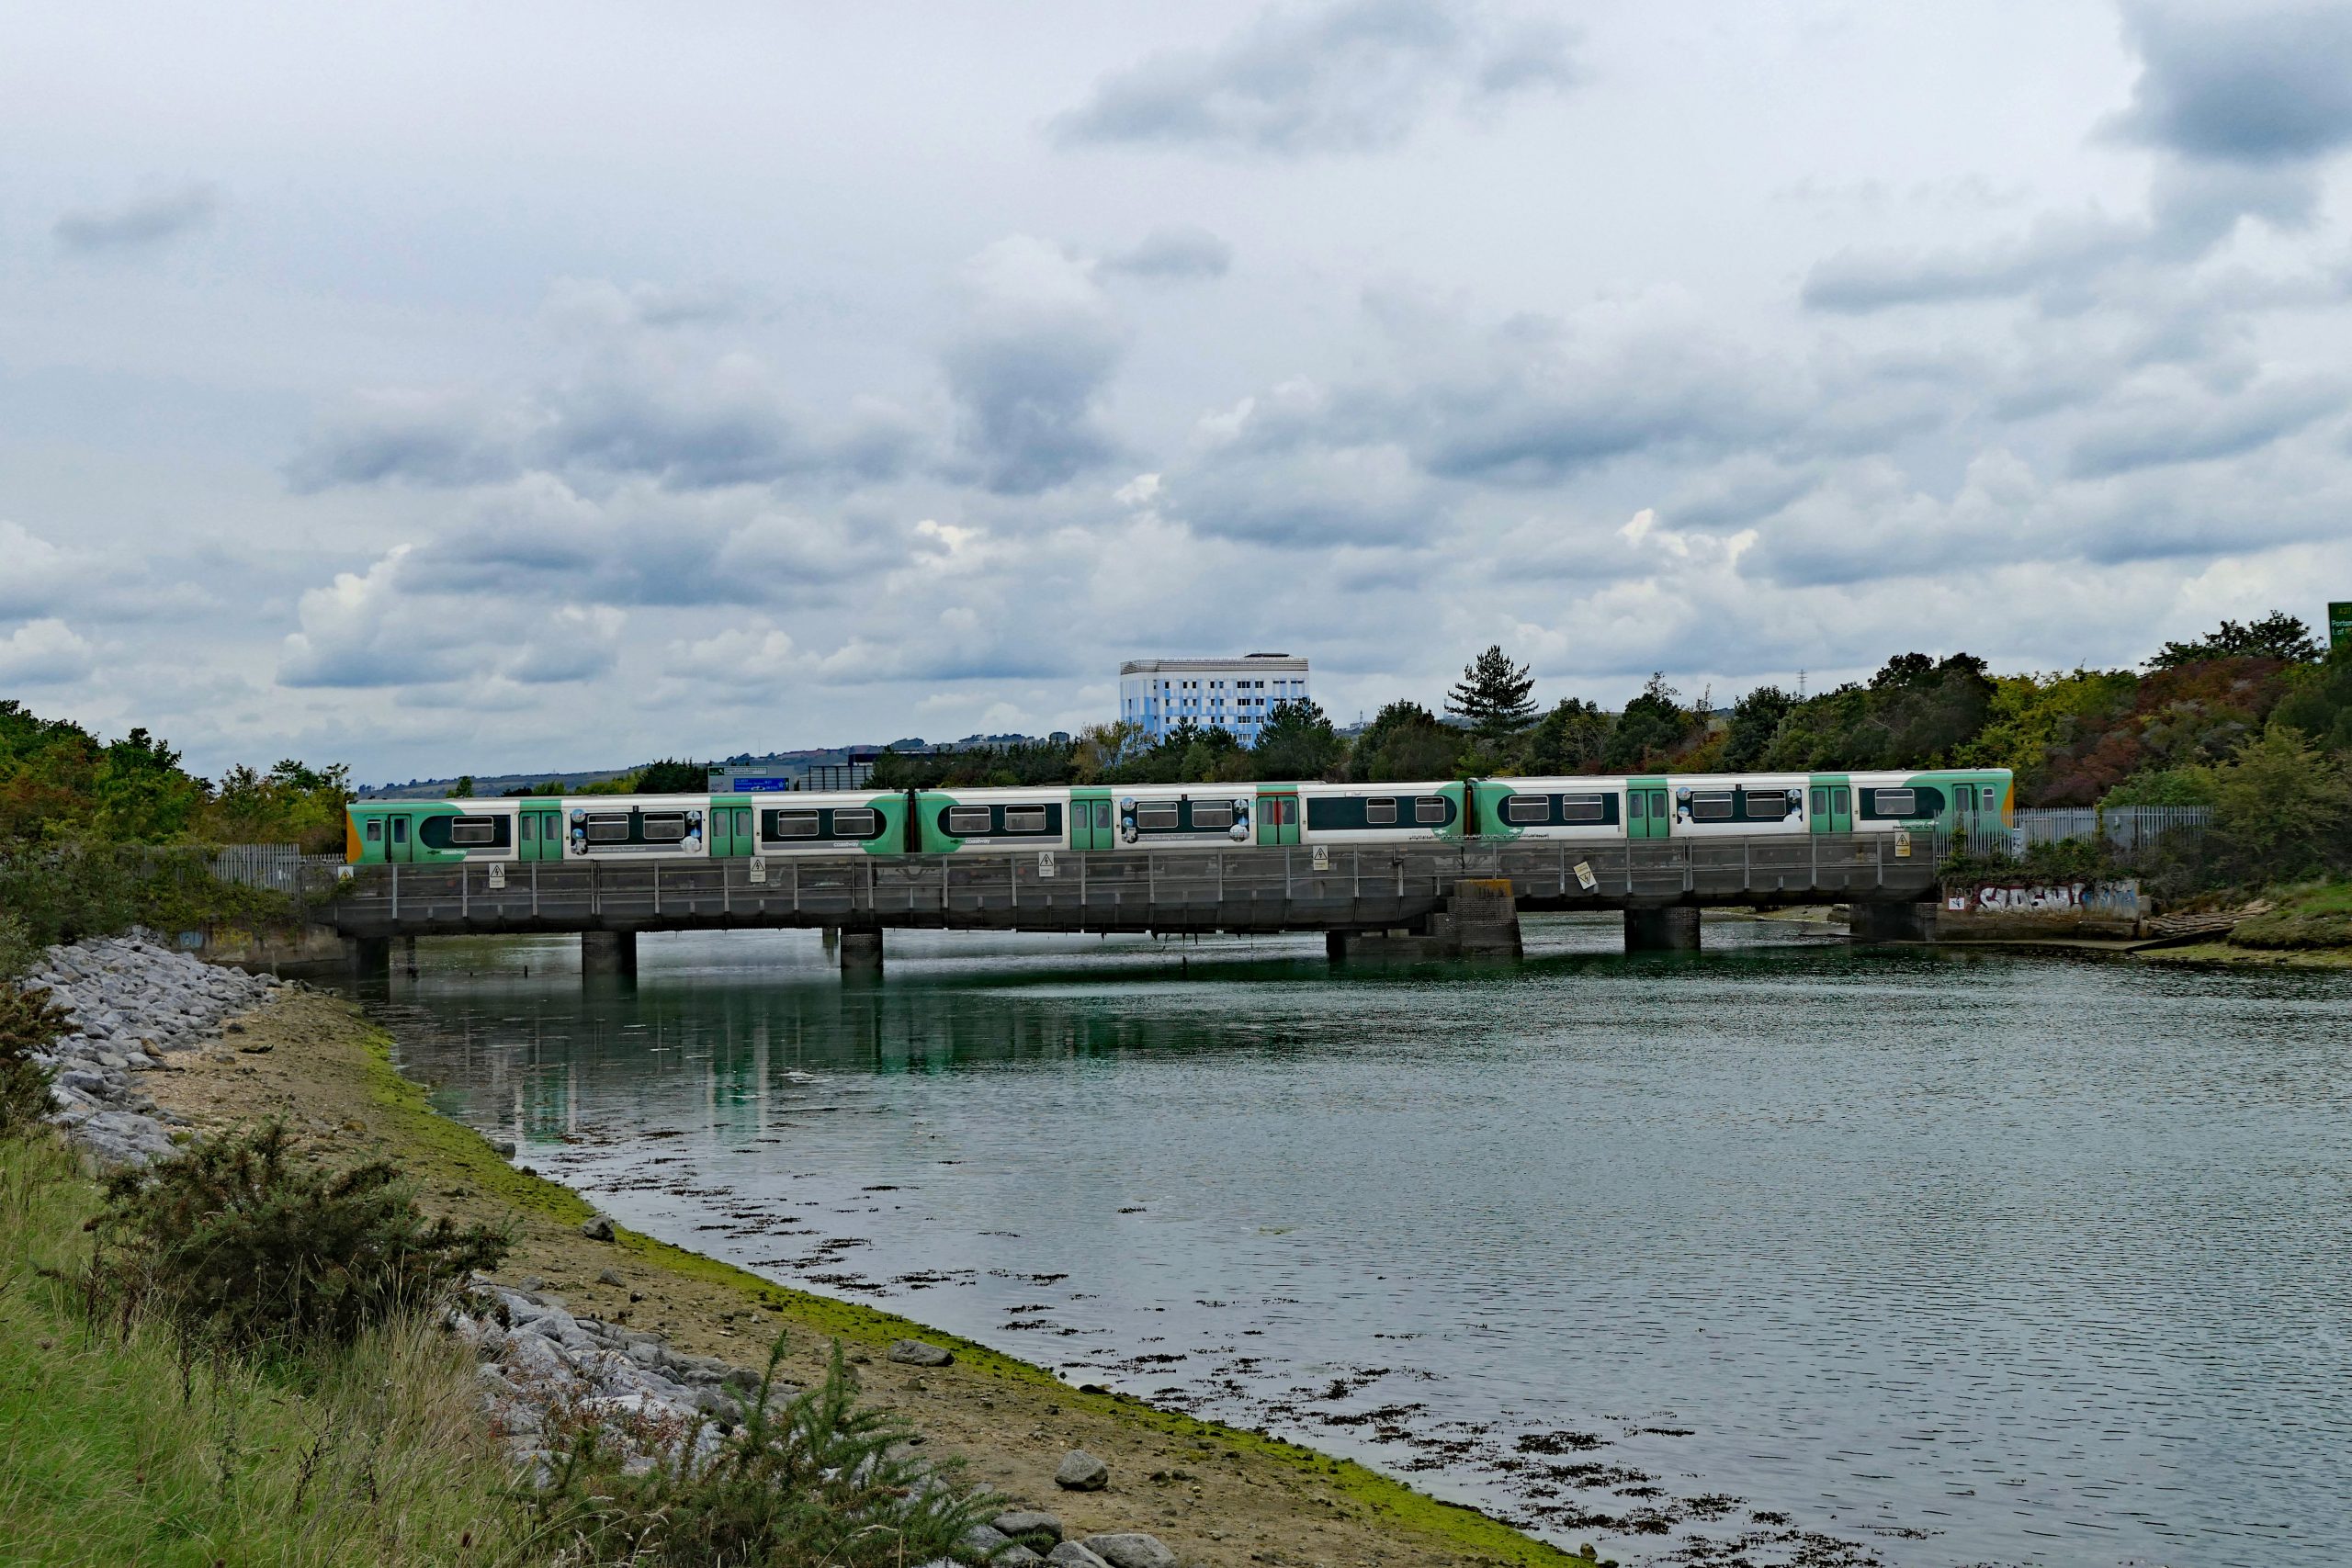 313 206 crossing Portcreek with rain threatening on the 12:00 Brighton to Portsmouth Harbour. 30 September 2022